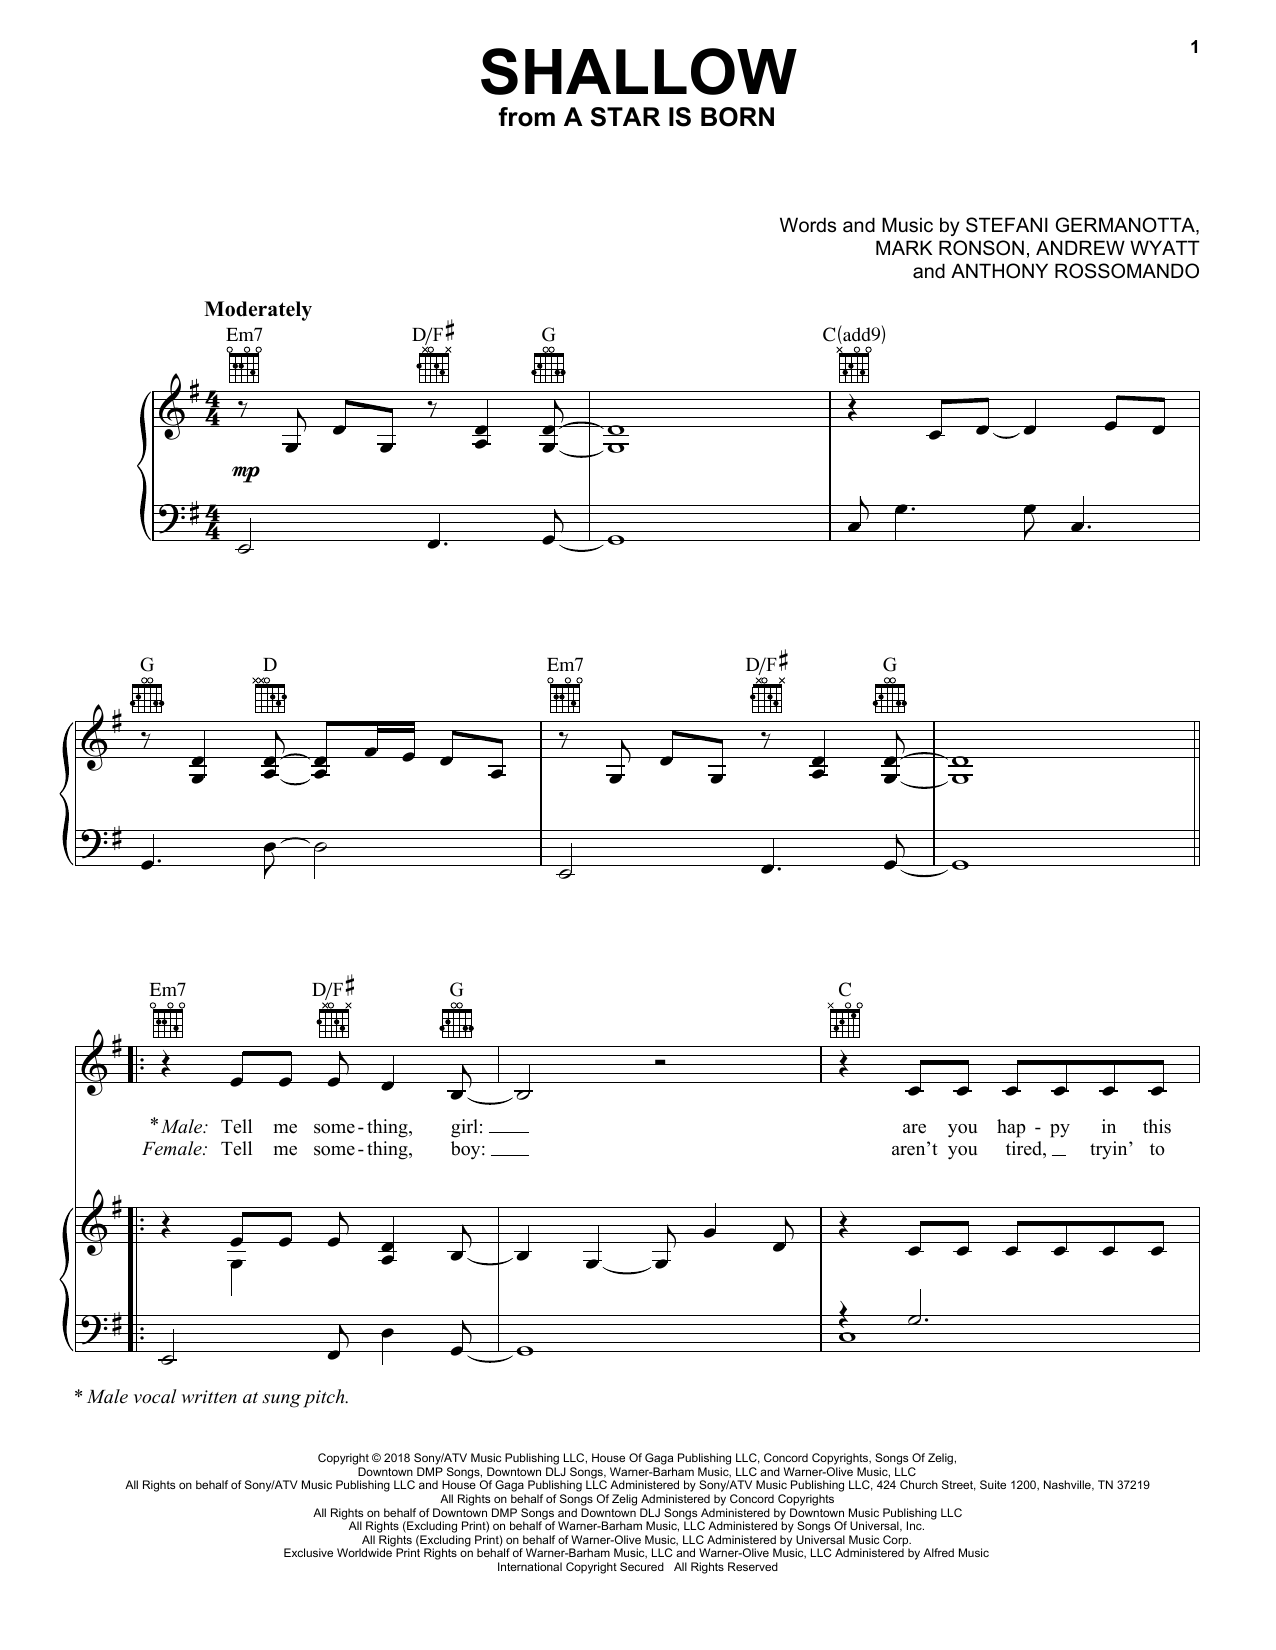 Lady Gaga & Bradley Cooper Shallow (from A Star Is Born) sheet music notes and chords. Download Printable PDF.